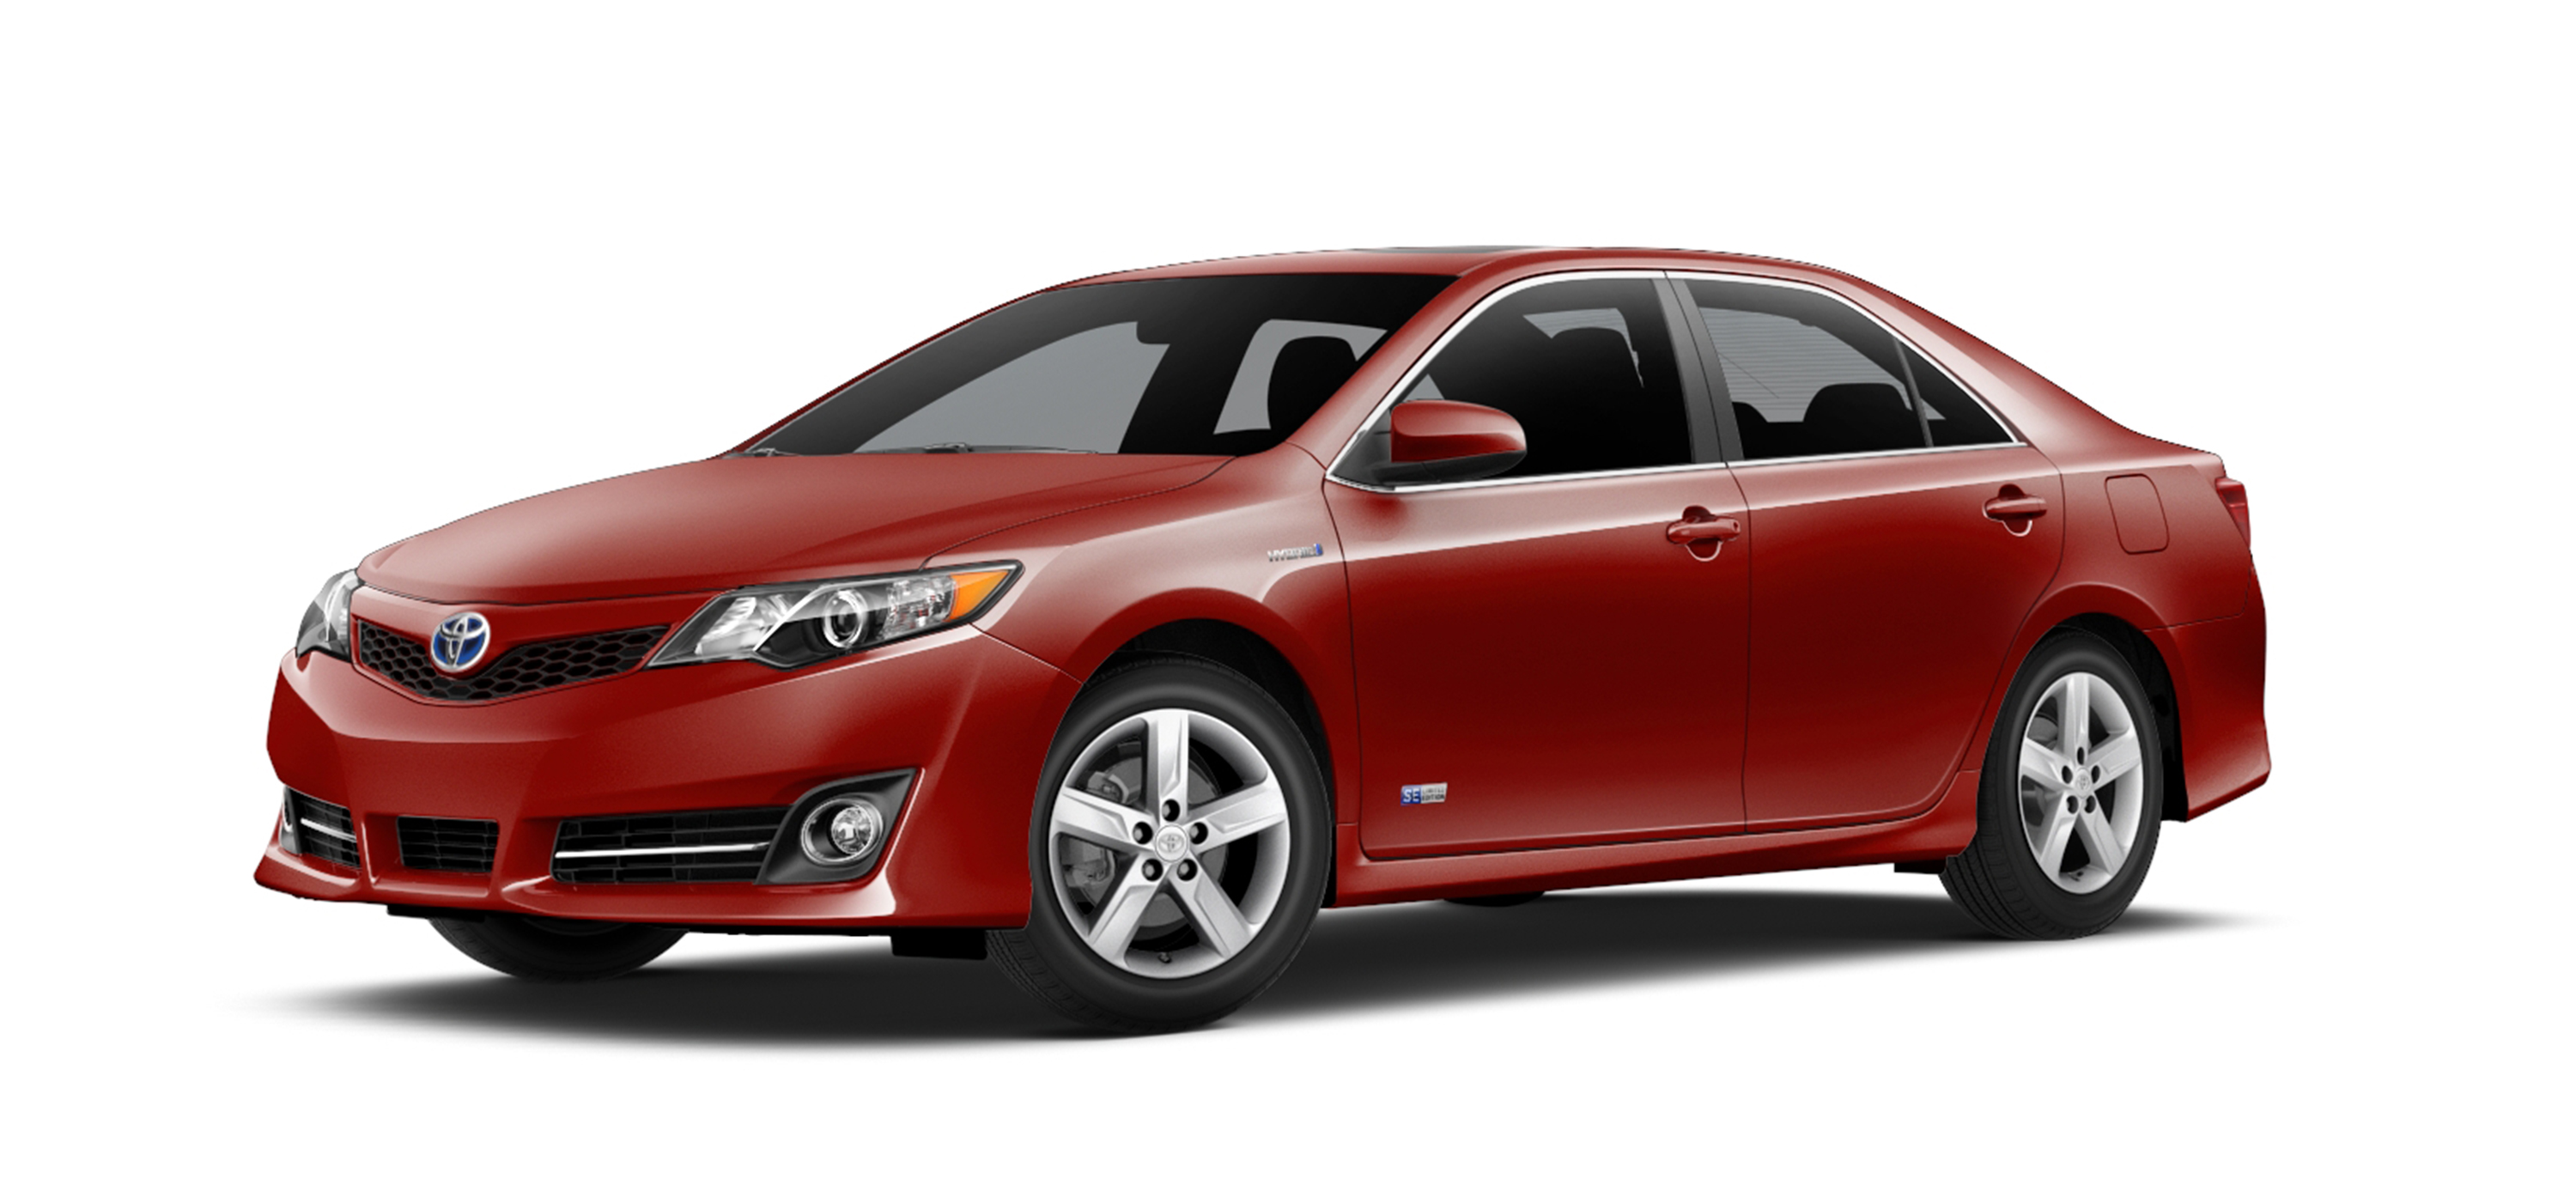 Spoiler Alert! Toyota Camry Hybrid Line-up Adds SE Limited Edition for  2014.5 Model Year - Toyota USA Newsroom